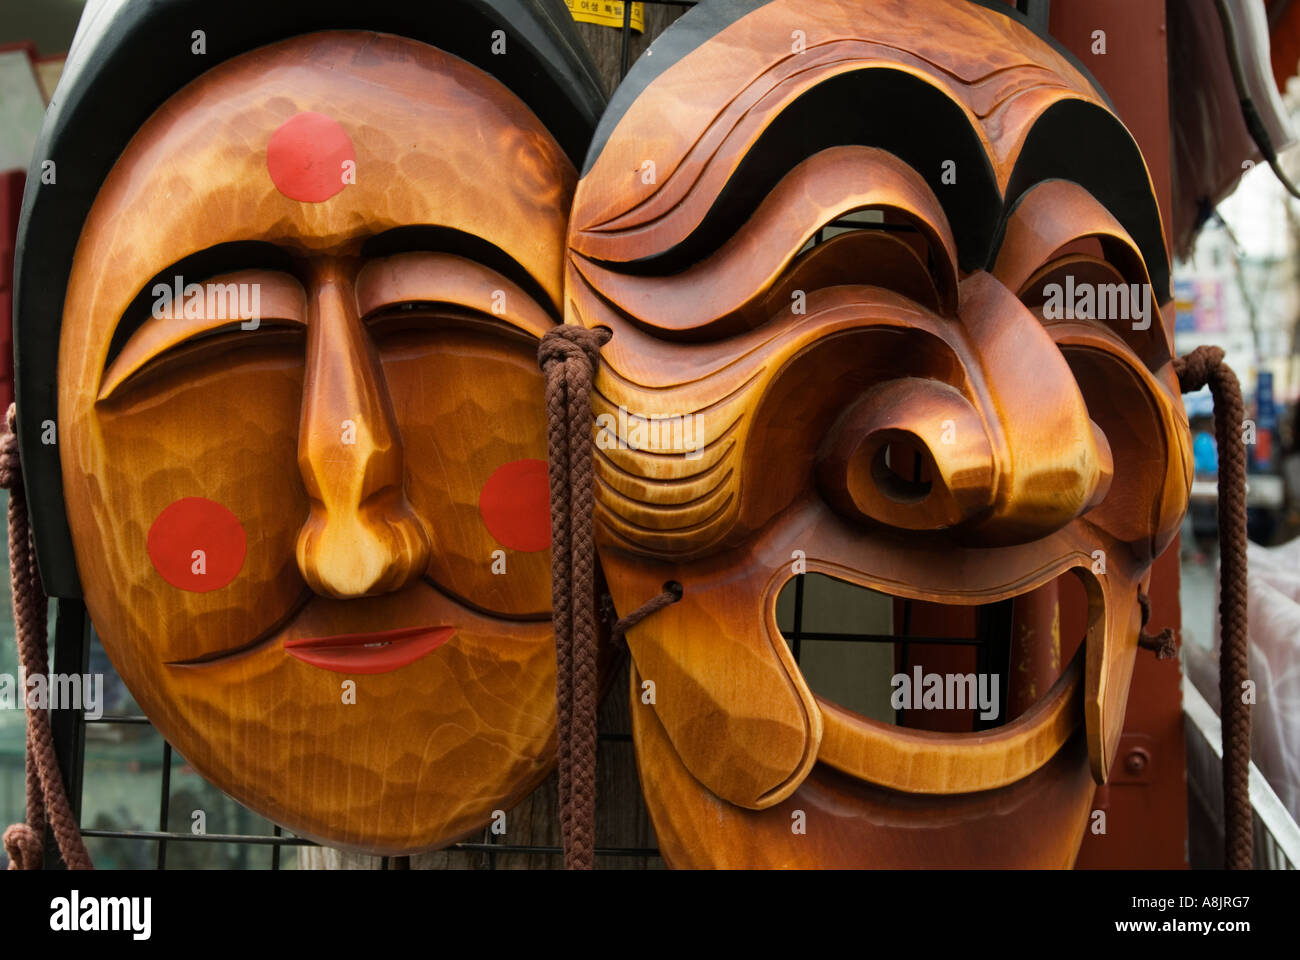 Wooden masks for sale in Insadong Market in Seoul South Korea Stock Photo